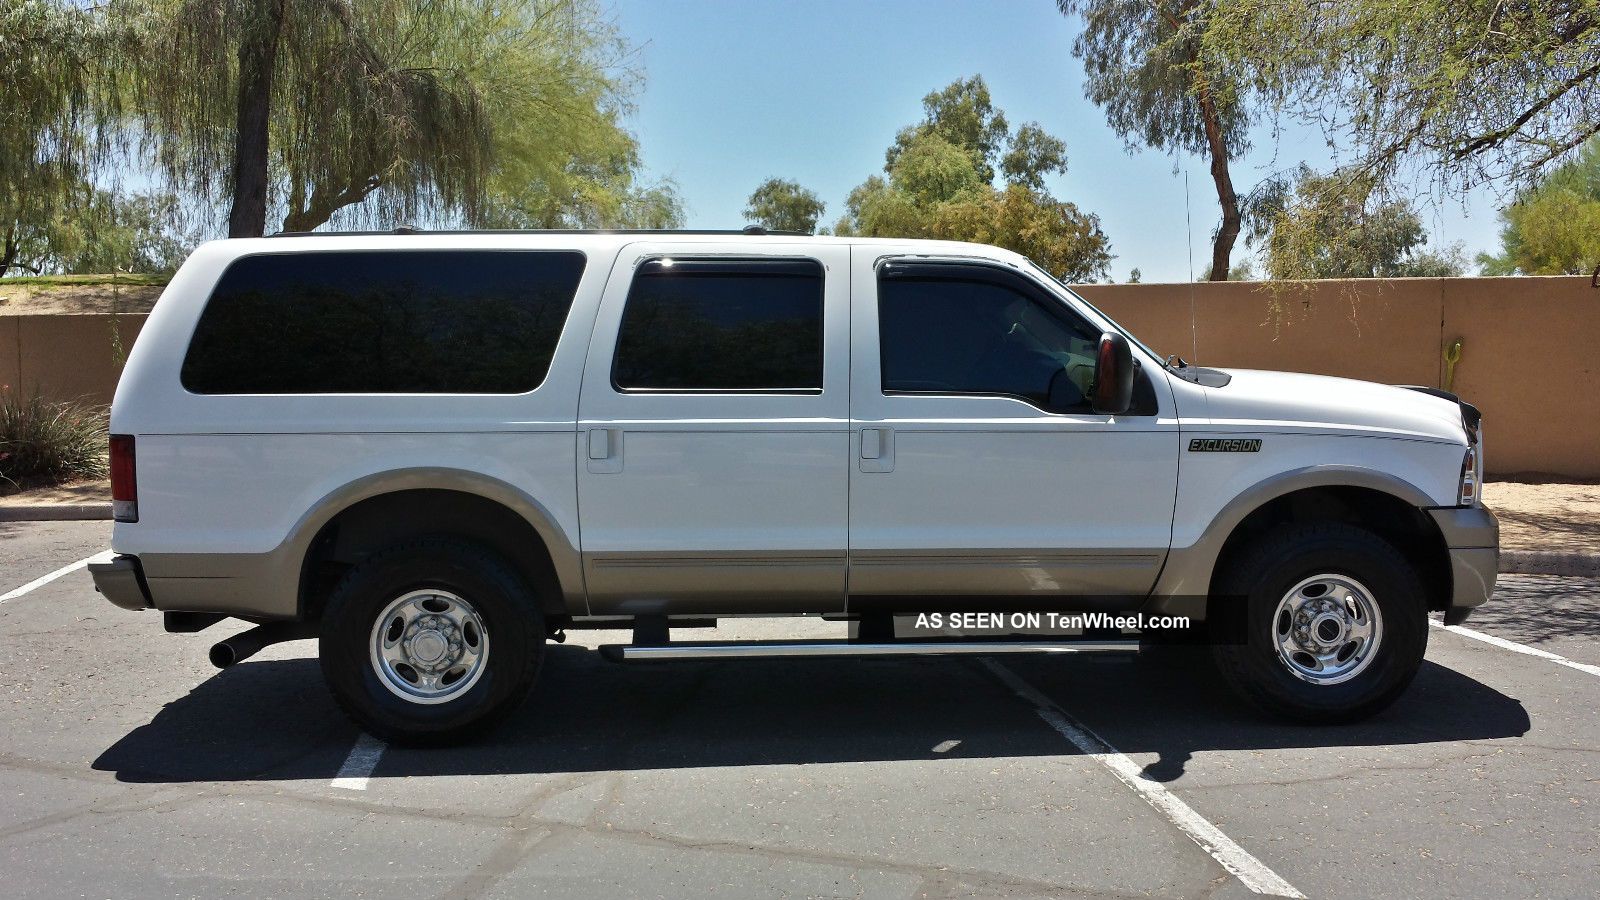 2005 ford excursion 6.0 diesel towing capacity